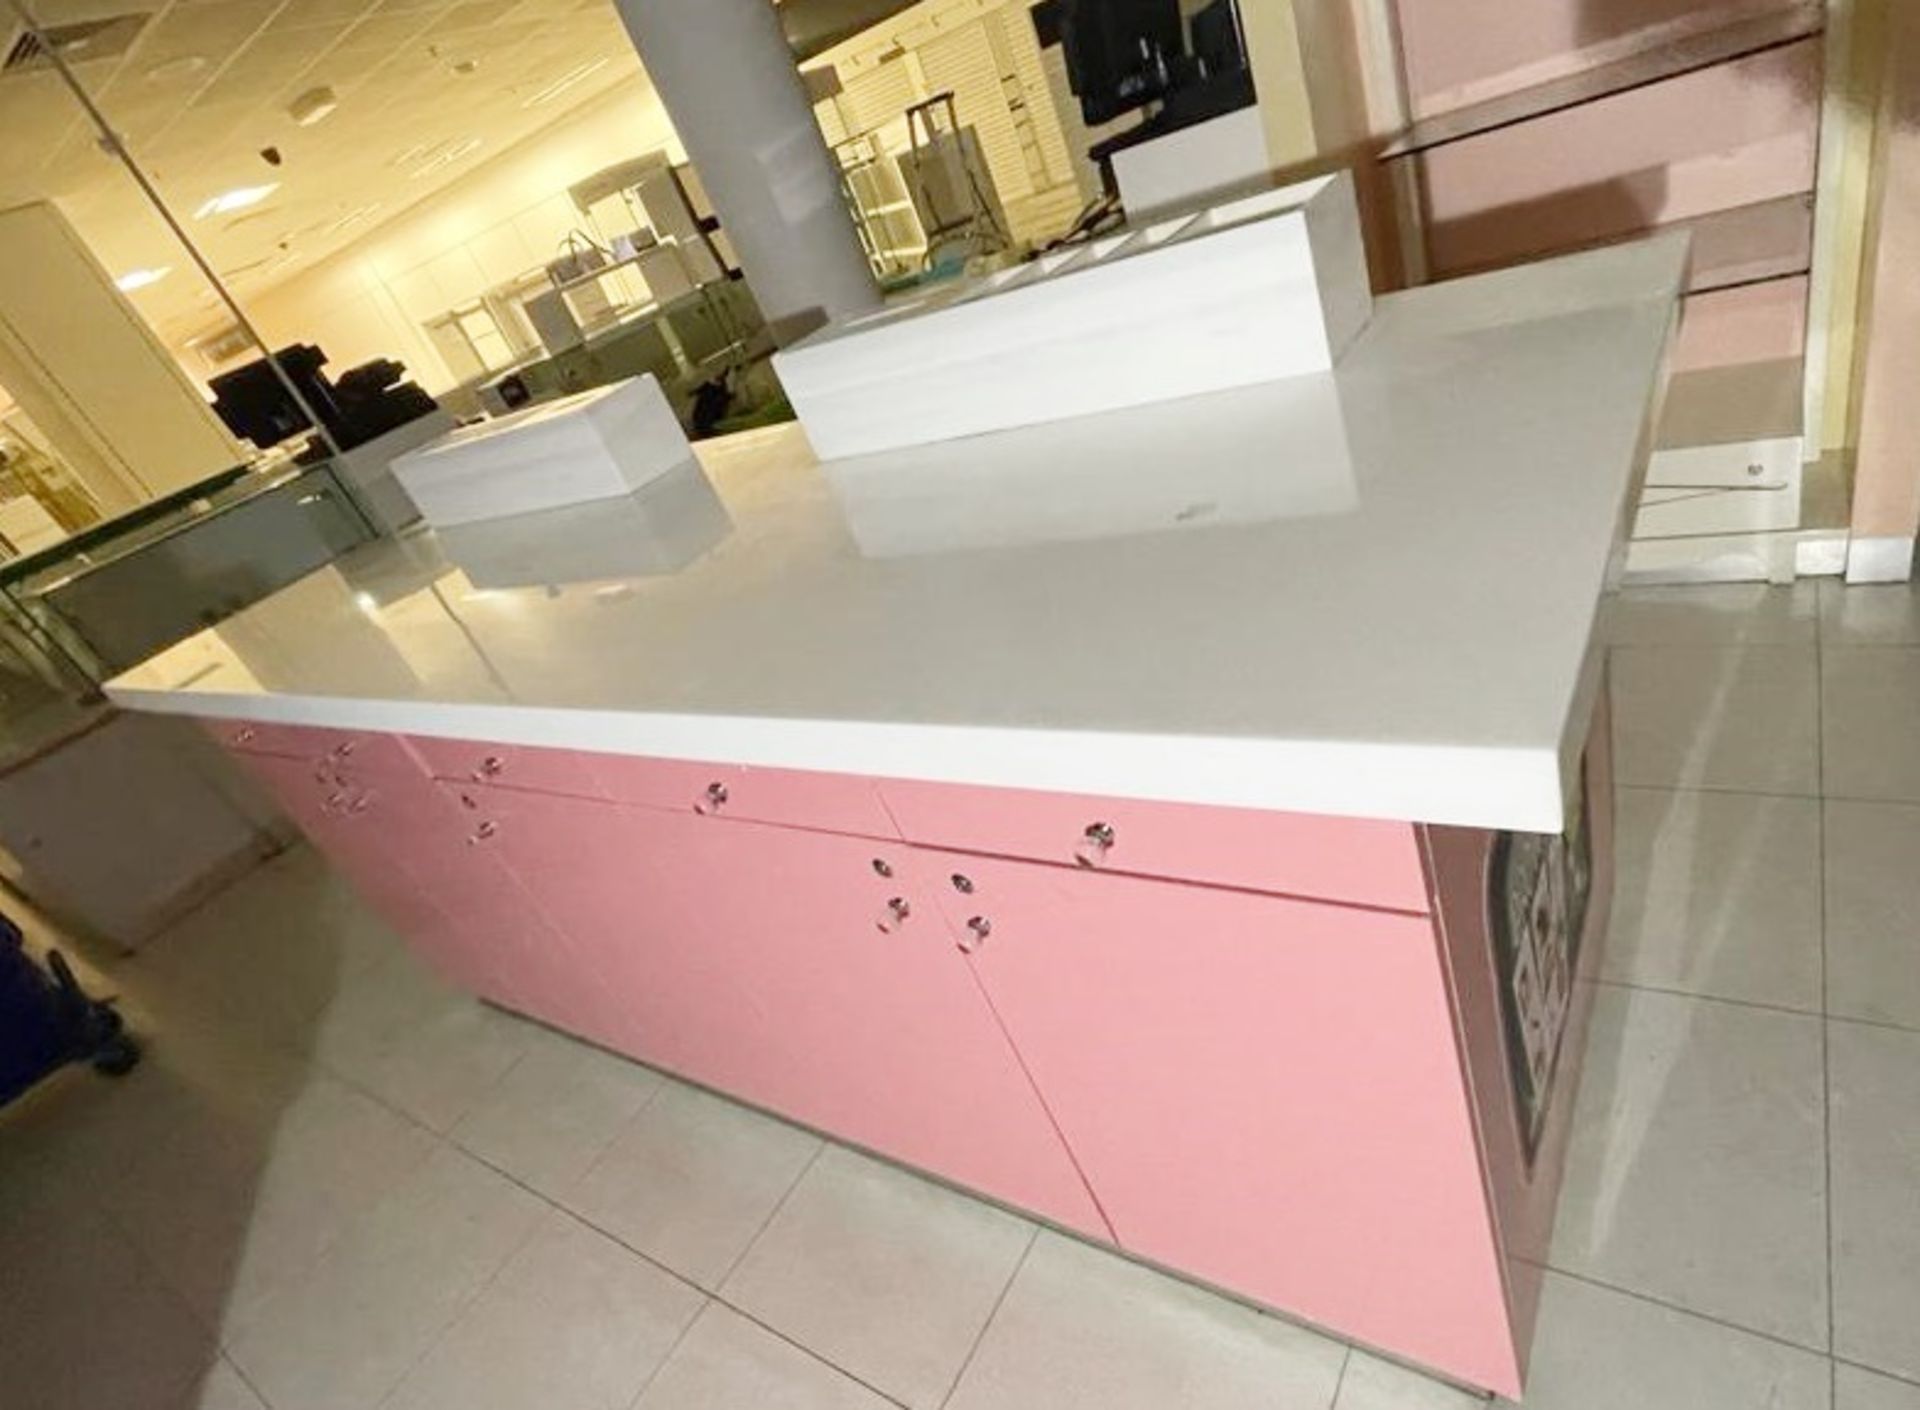 1 x Benefit Retail Testing Counter With Corian Worktop, Sample Holders and Bin Chute - Features Lots - Image 15 of 19